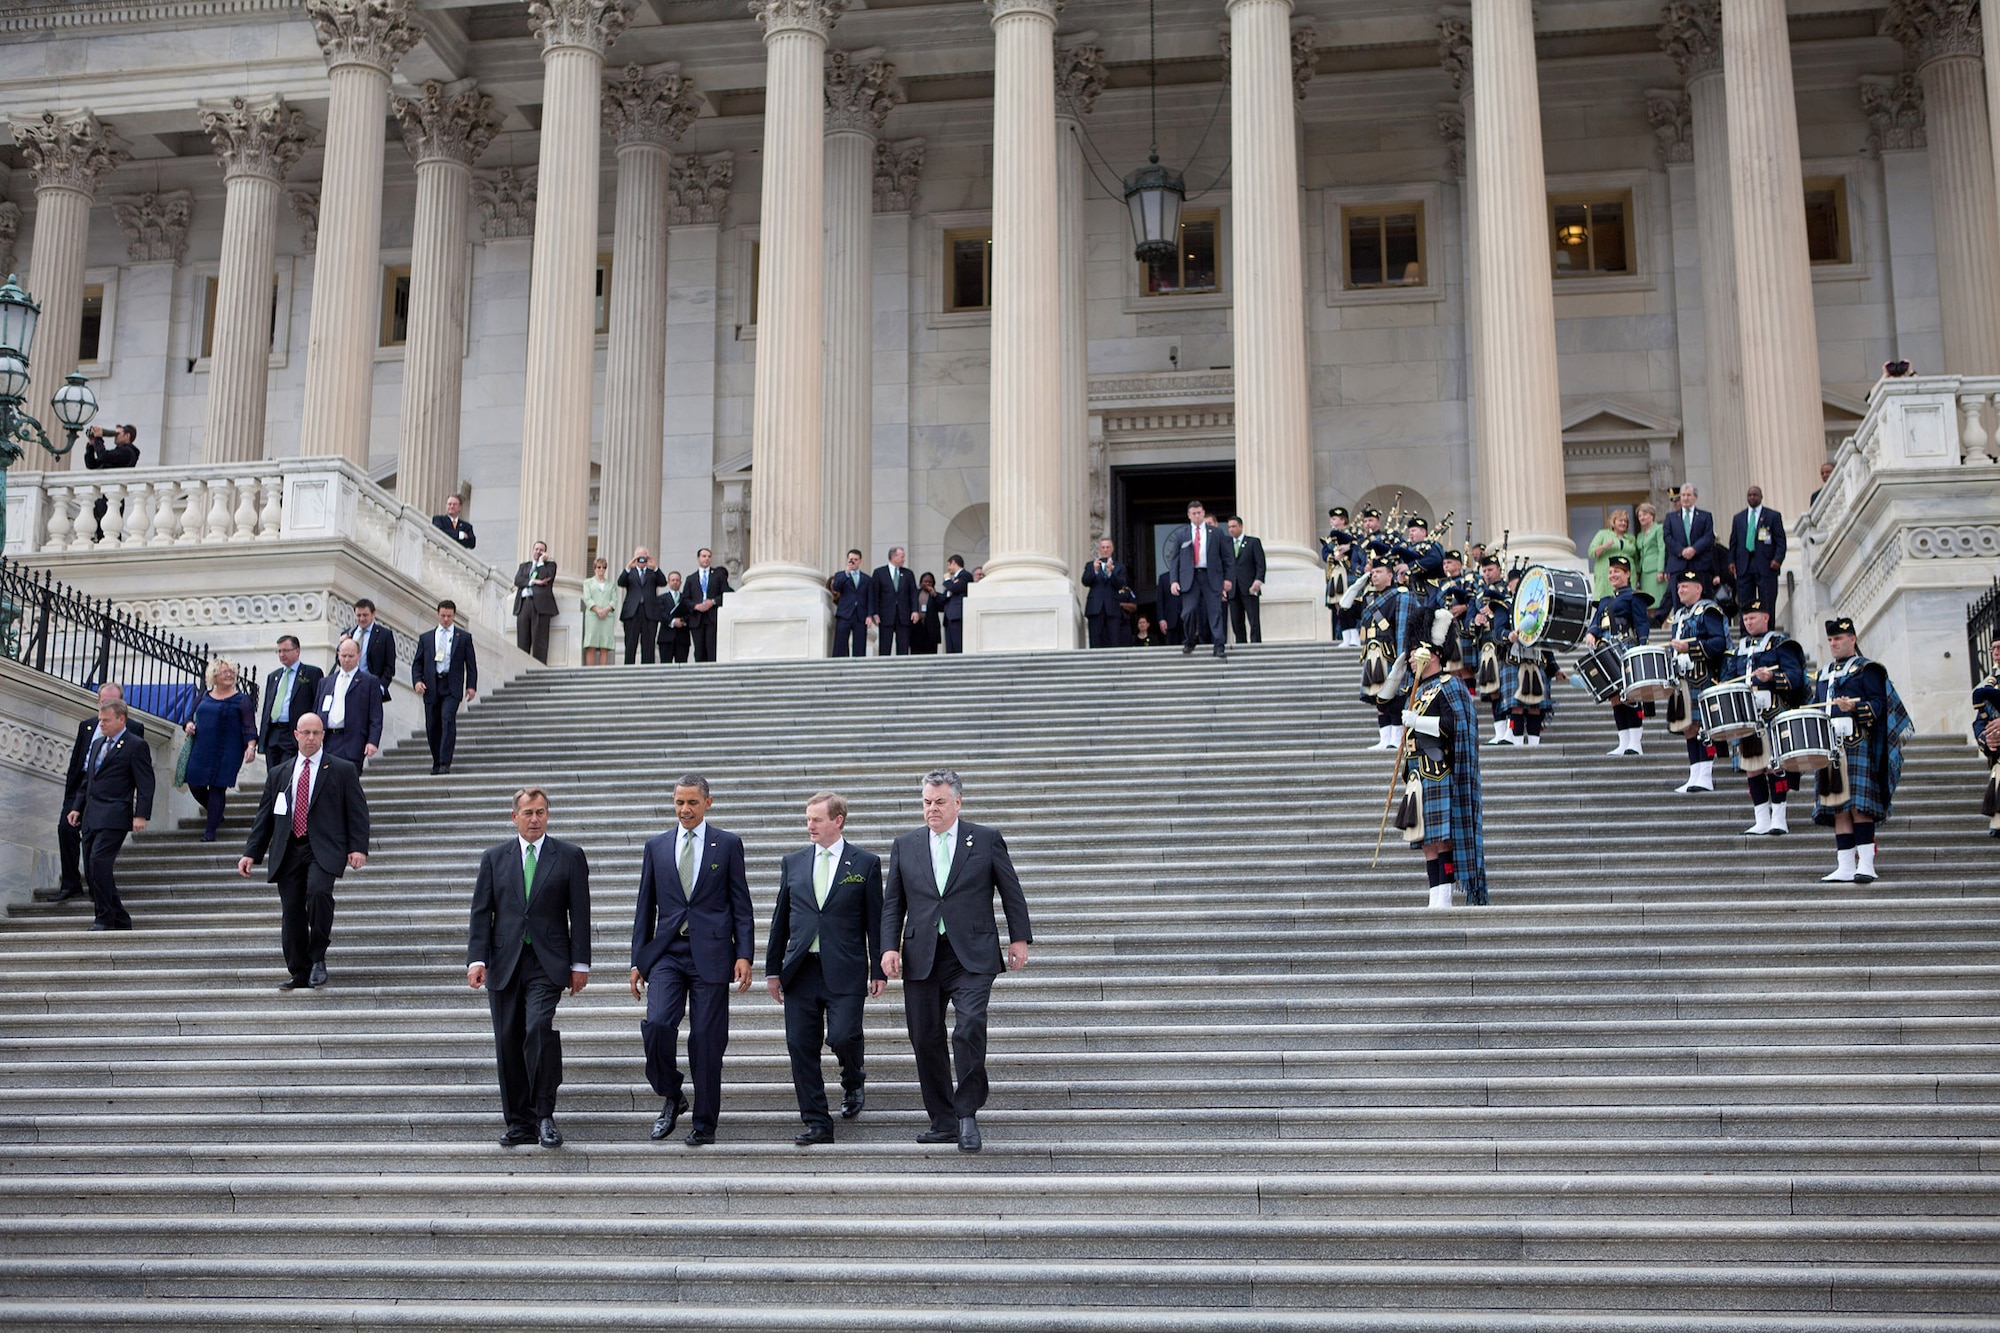 President Barack Obama walks down the steps with Prime Minister (Taoiseach) Enda Kenny of Ireland, House Speaker John Boehner and Rep. Peter King at the U.S. Capitol in Washington, D.C., March 20, 2012. The Band of the Air Force Reserve Pipe Band performed throughout the day's events, including the traditional walk down the capitol steps. (Official White House Photo by Sonya N. Hebert)